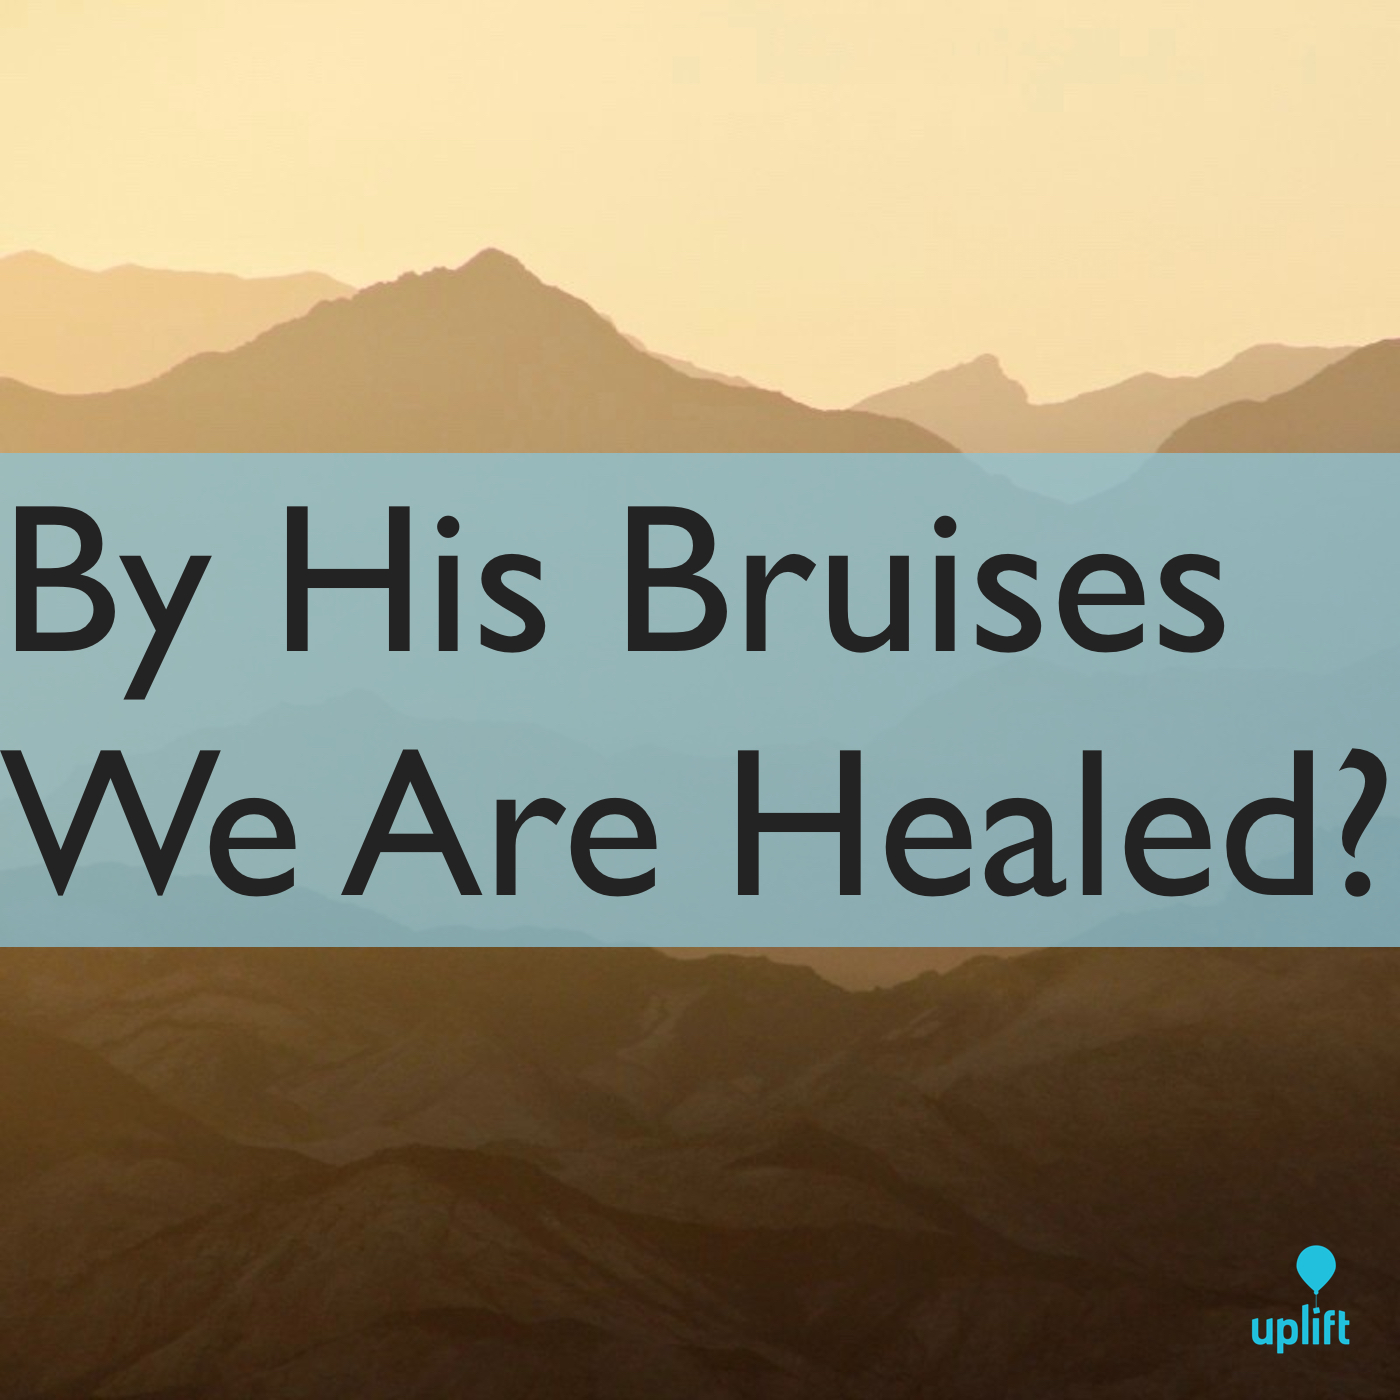 Episode 48: By His Bruises We Are Healed?